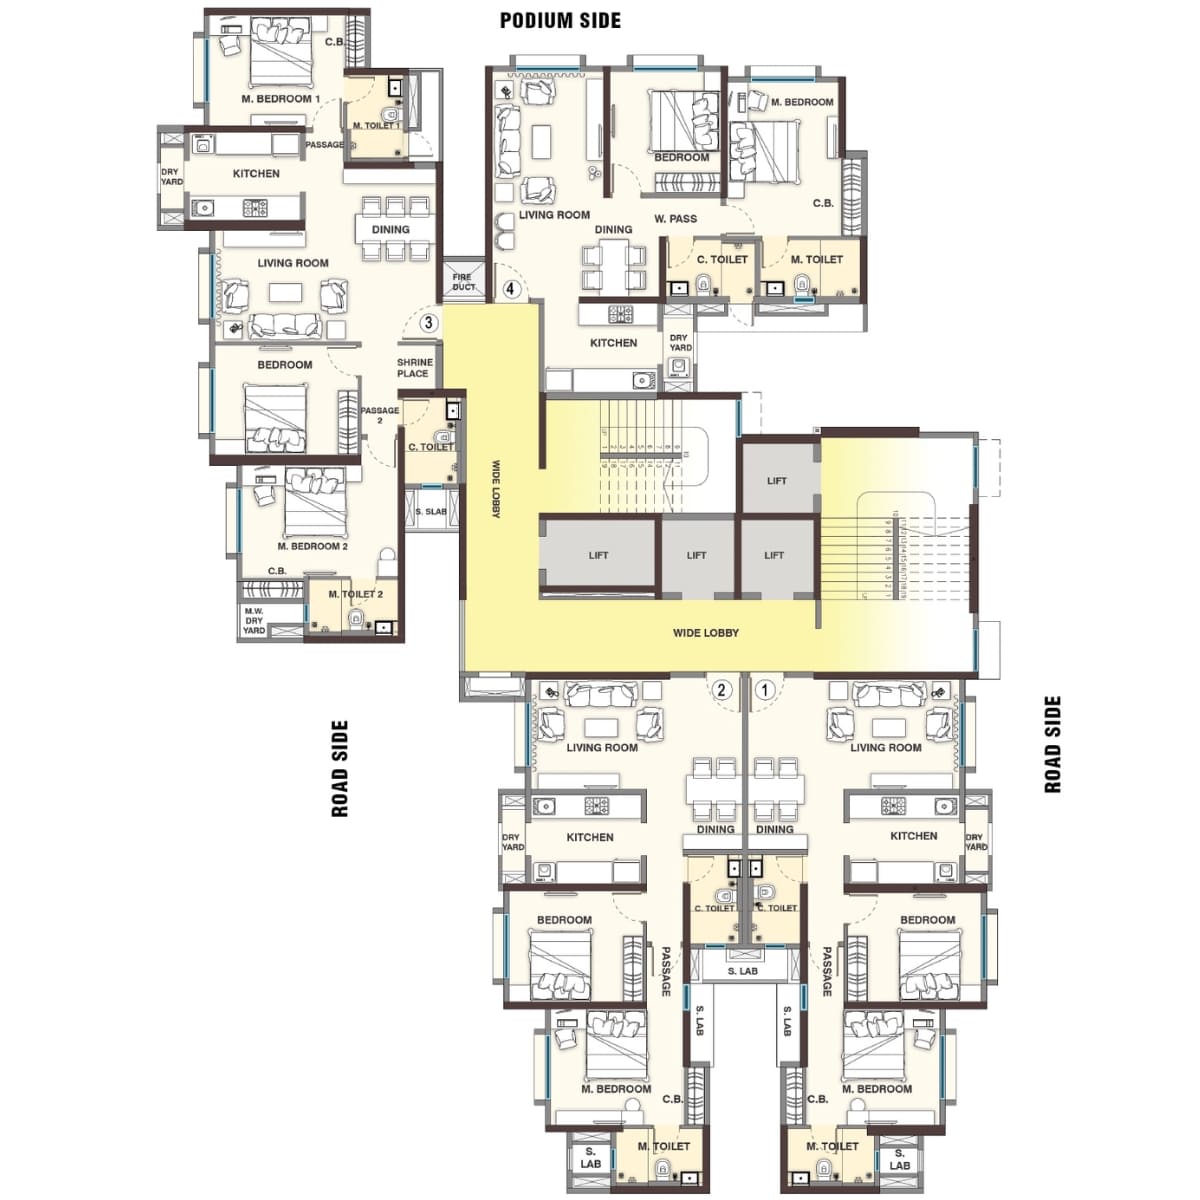 Sheth-Vasant-Lawns-Floor-Plan-Fern-1st-to-5th-7th-to-10th-12th-to-15th-17th-to-22nd